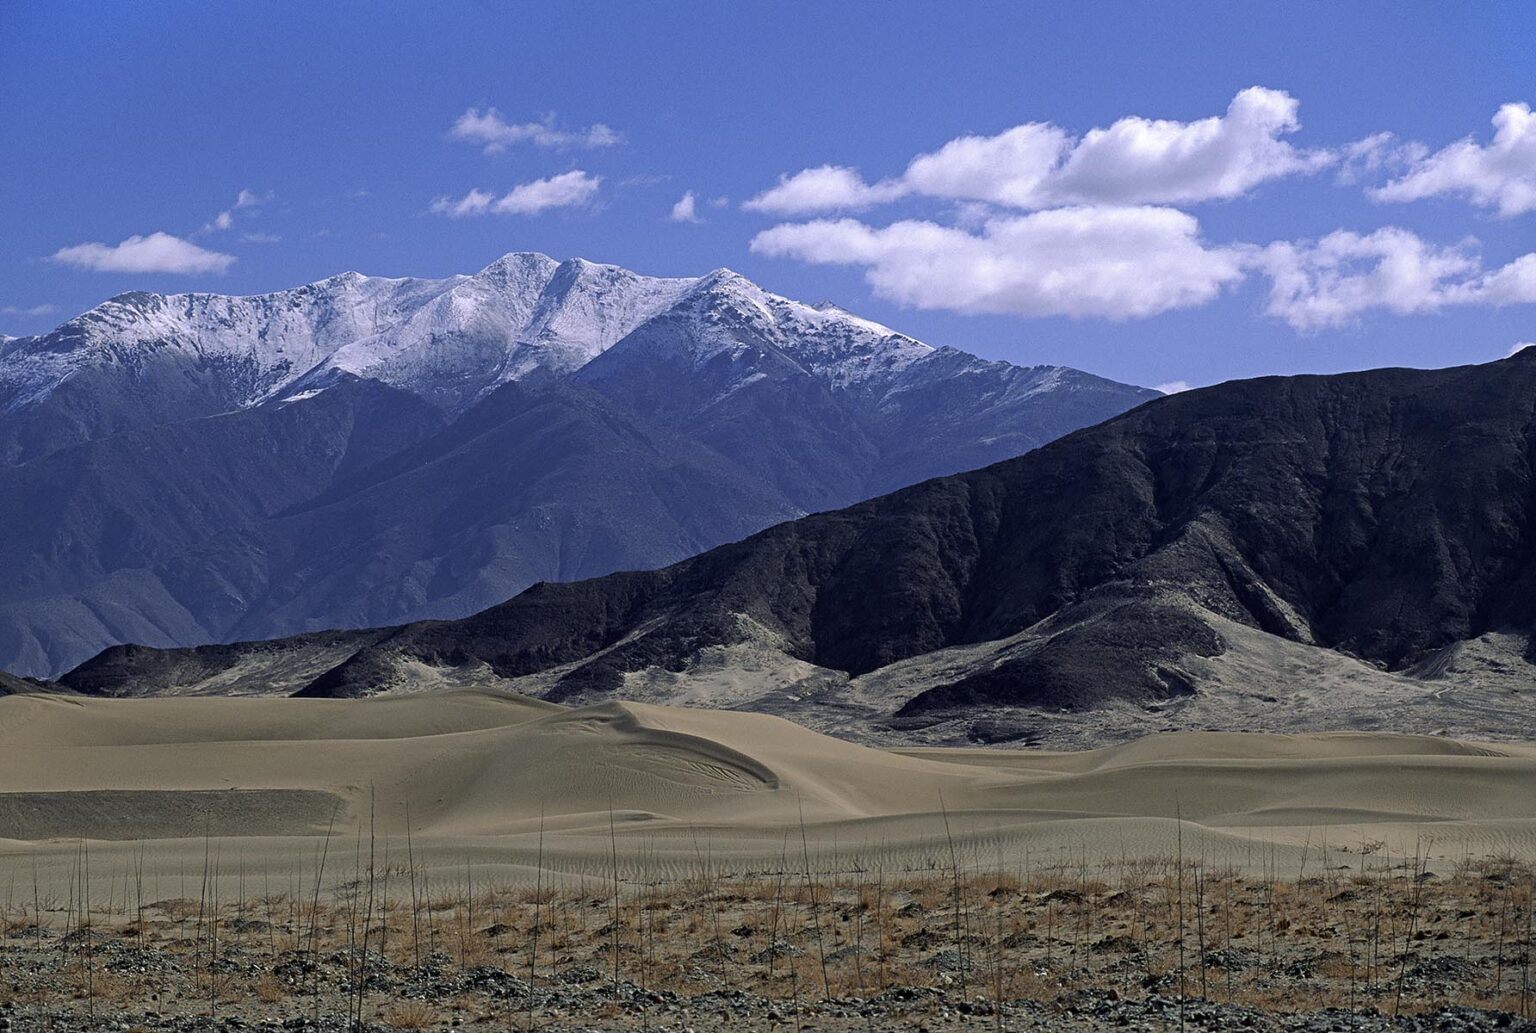 SAND DUNES and MOUNTAIN PEAKS on the TIBETAN PLATAU in the YARLUNG TSANGPO WATERSHED - CENTRAL TIBET